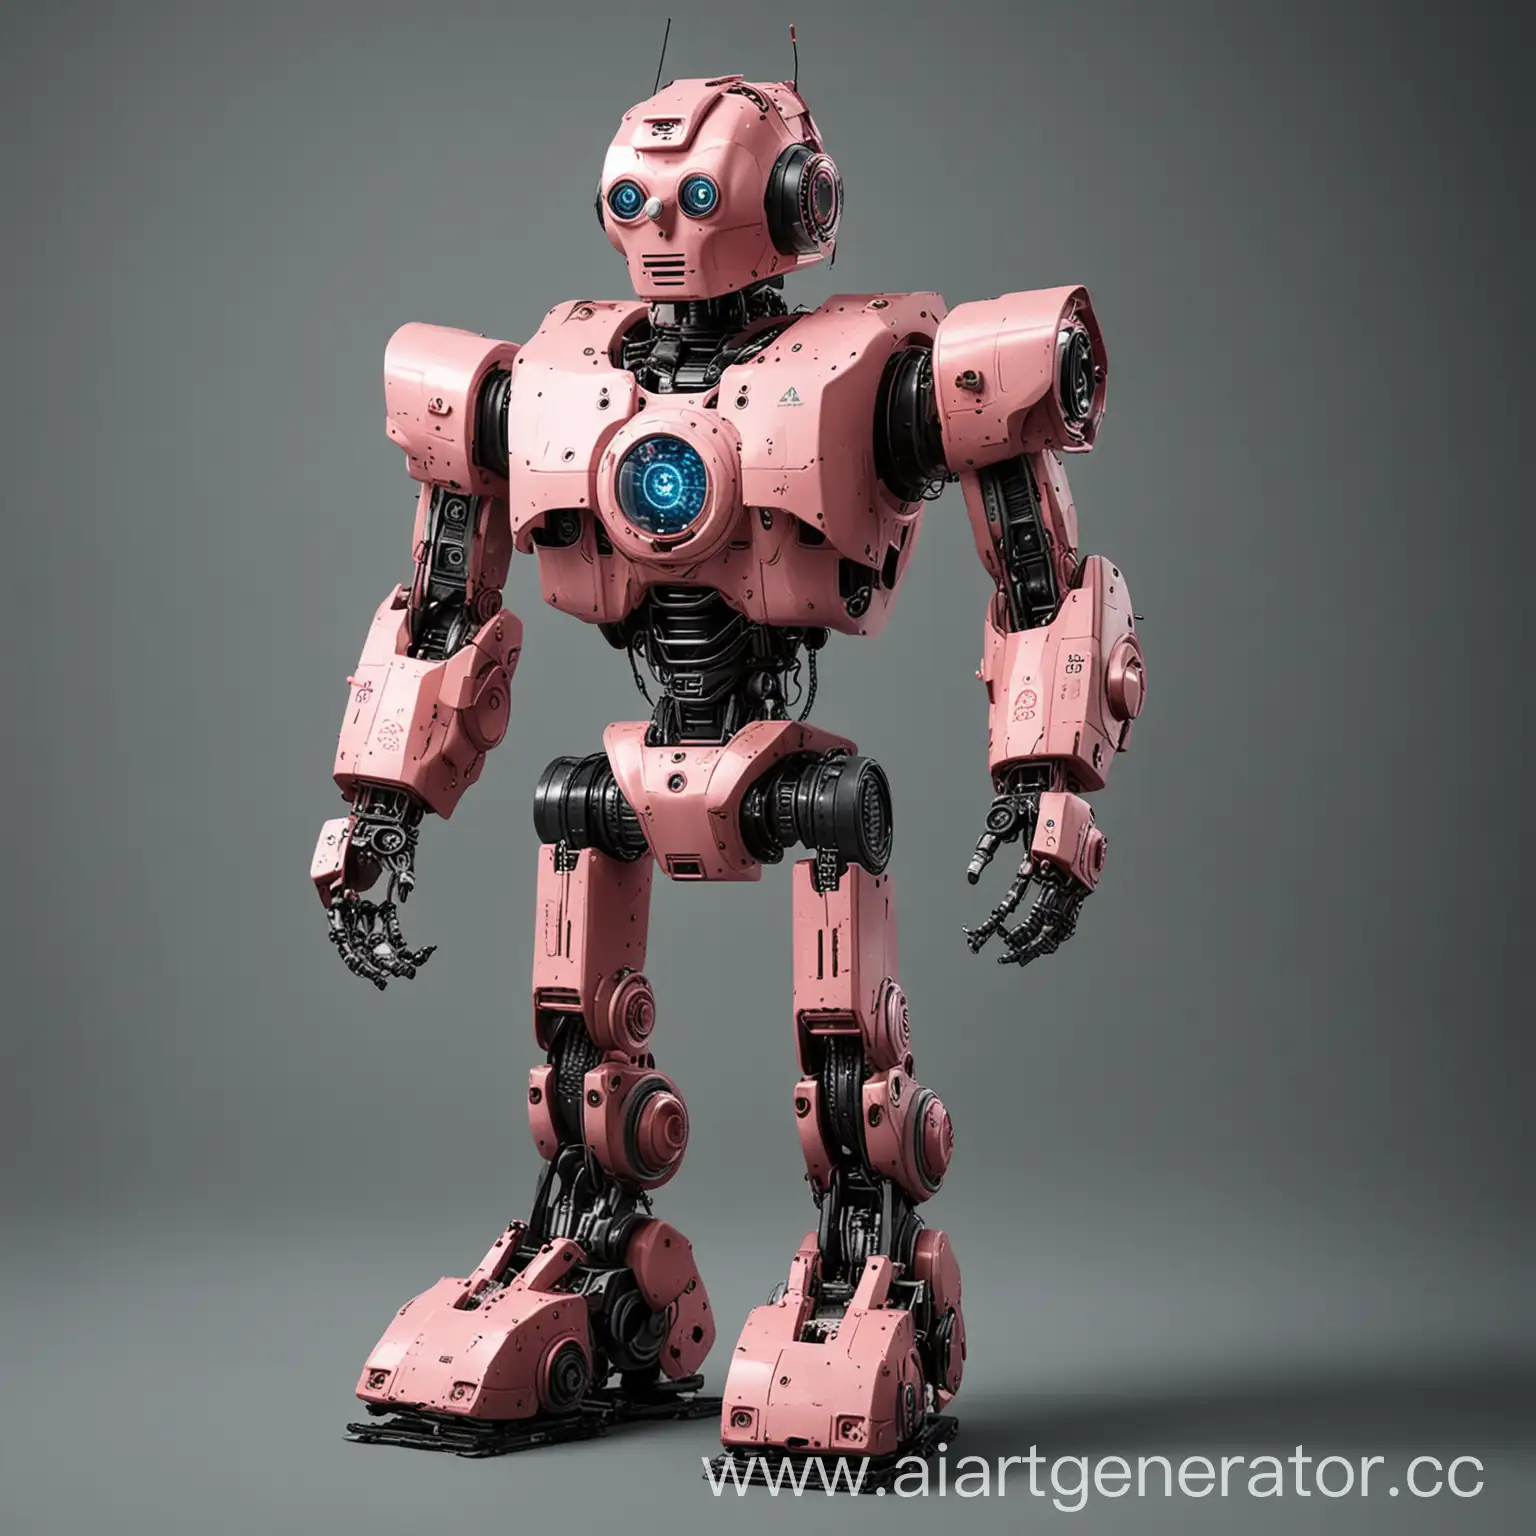 Robot-Girl-in-Pink-Futuristic-Android-in-RoseColored-Attire